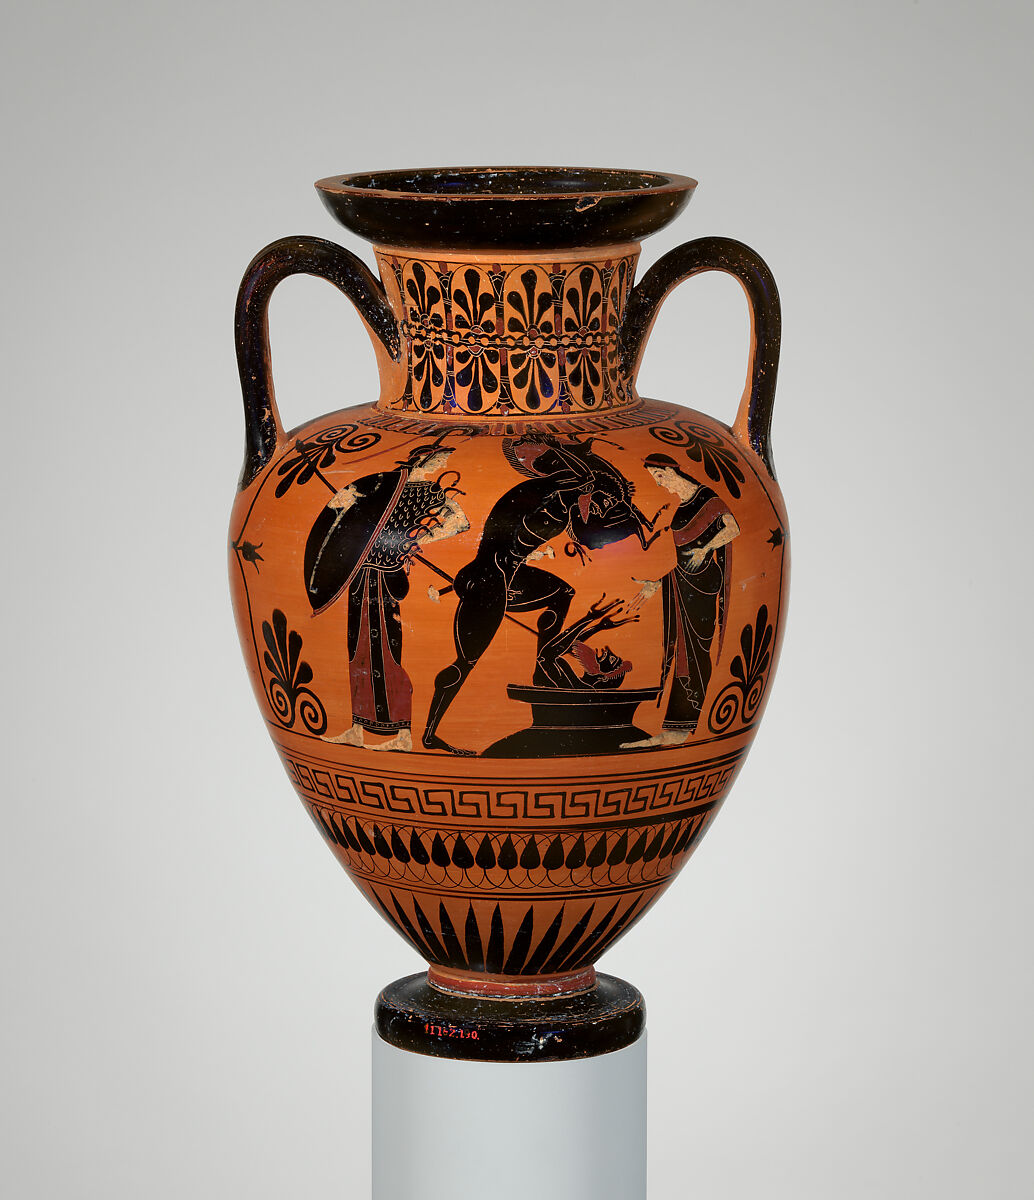 Neck-amphora, Attributed to the Group of Würzburg 199, Terracotta, Greek, Attic 